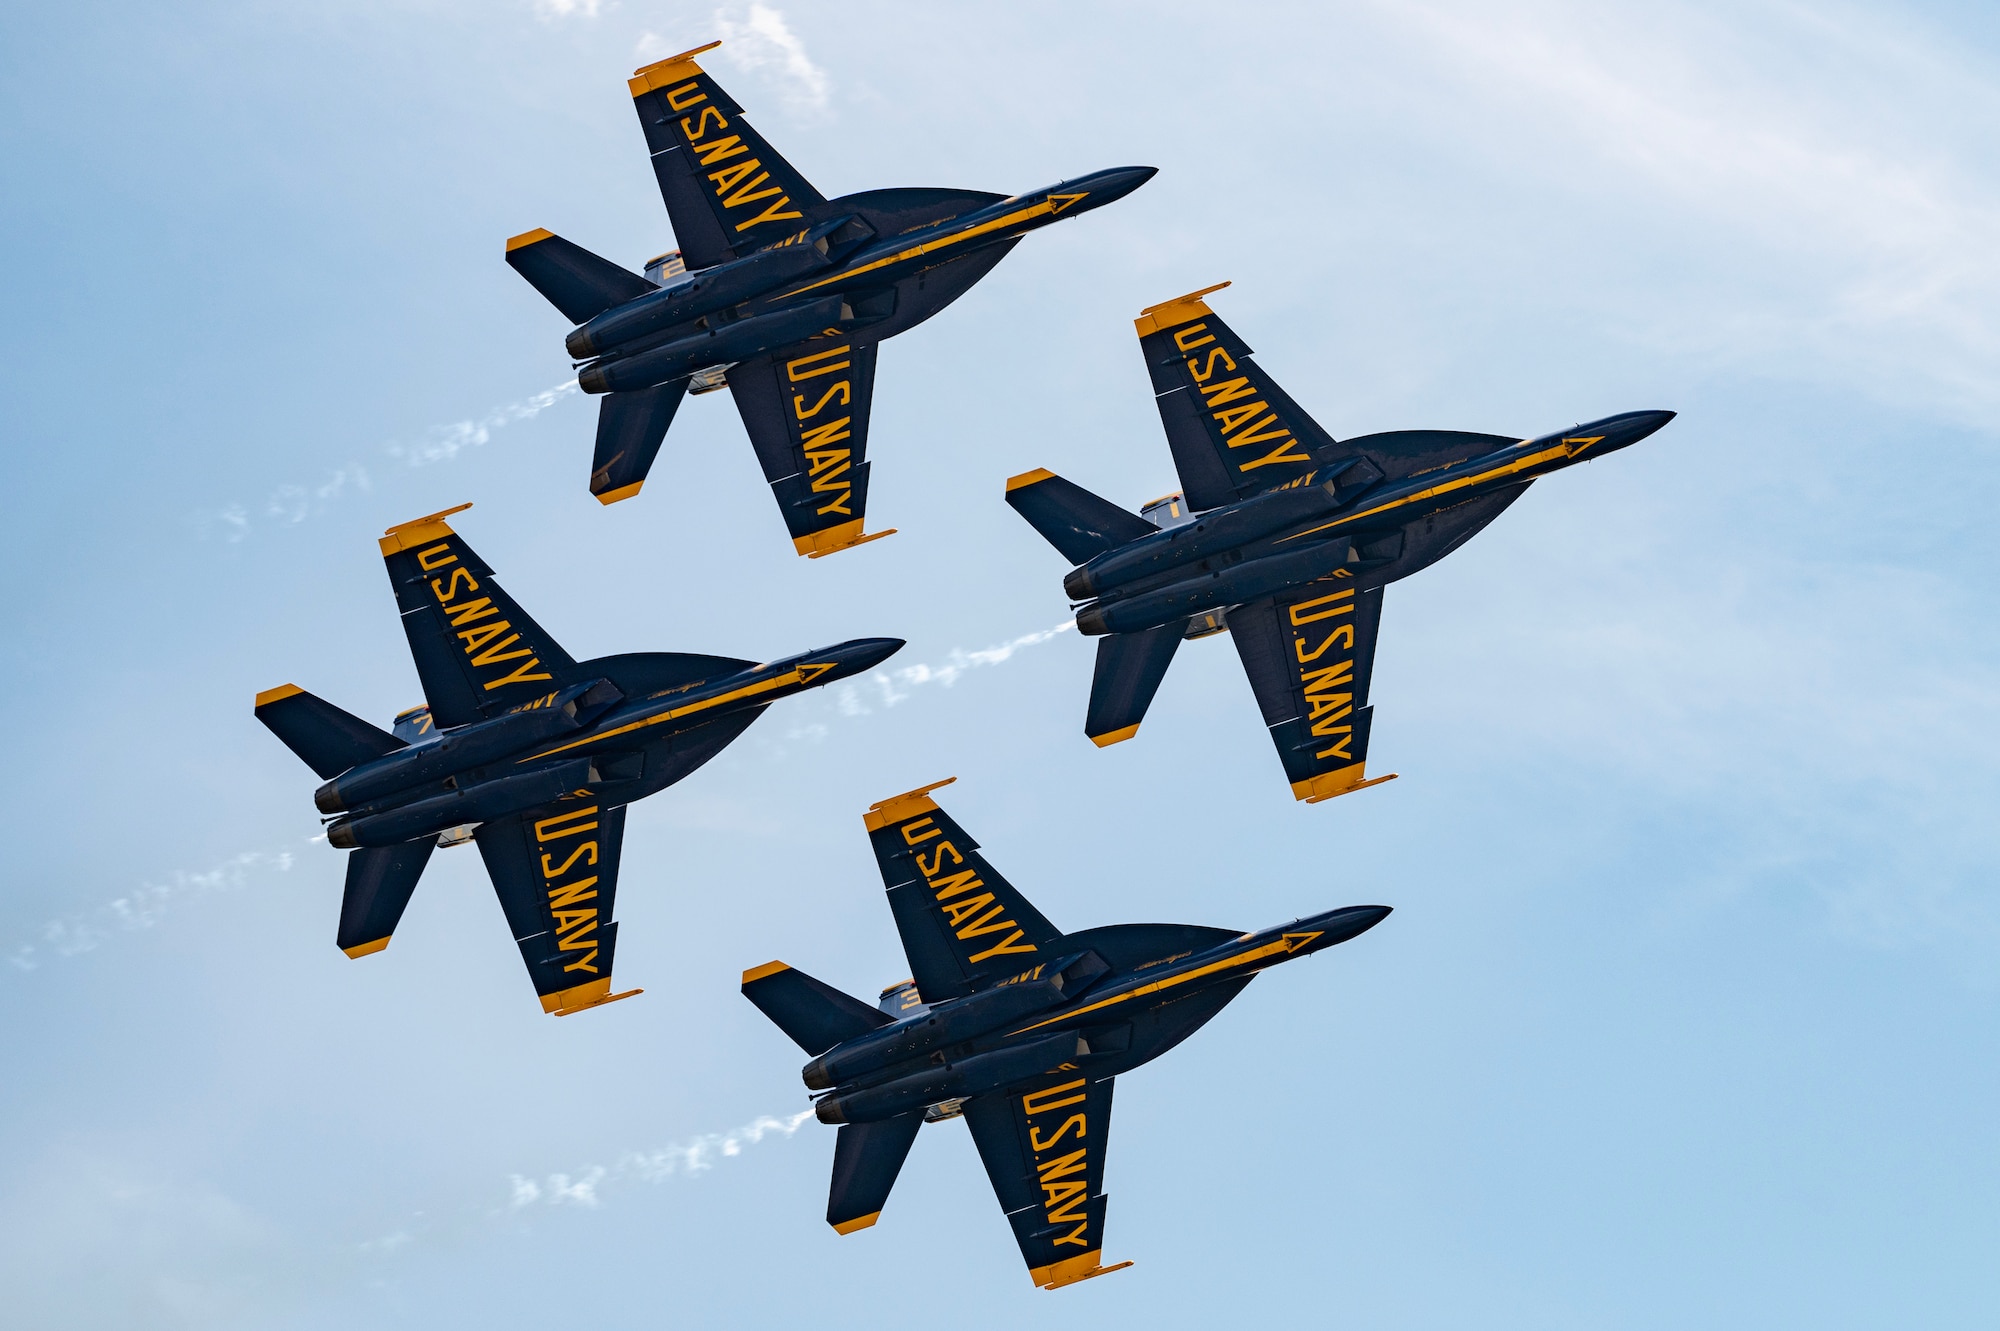 The U.S. Navy Blue Angels in formation during the Tinker Air Show at Tinker Air Force Base.